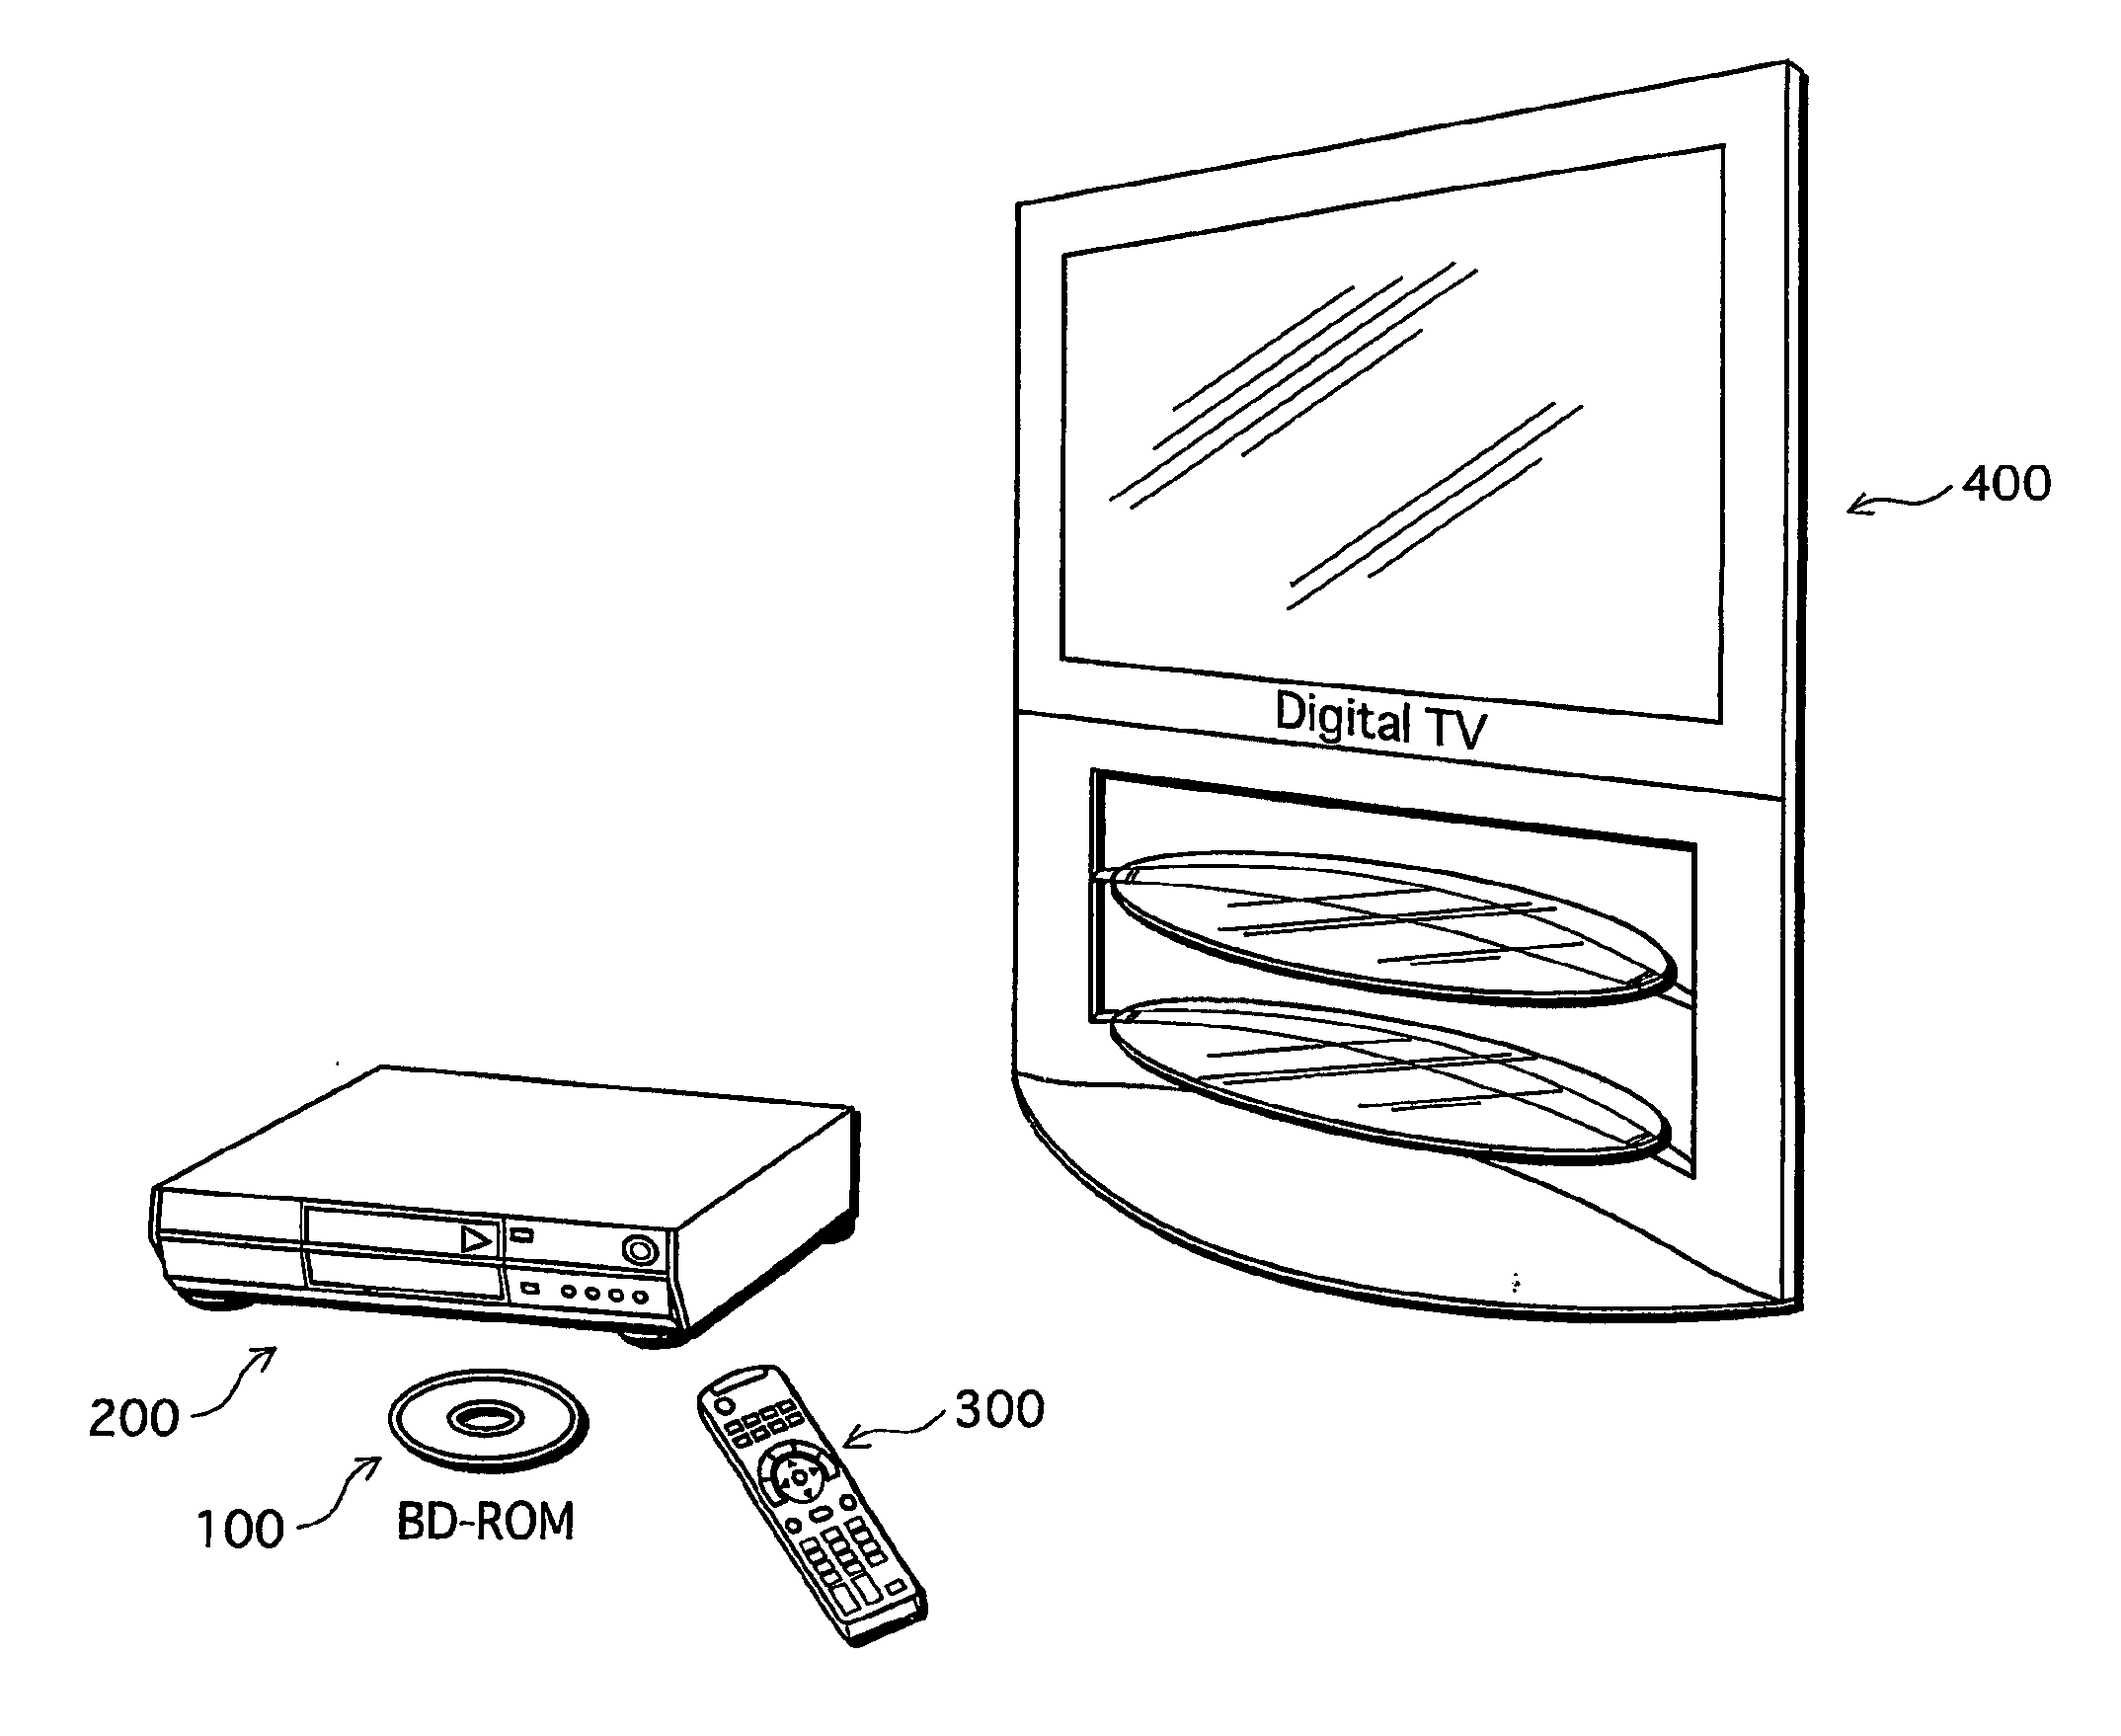 Playback apparatus for performing application-synchronized playback